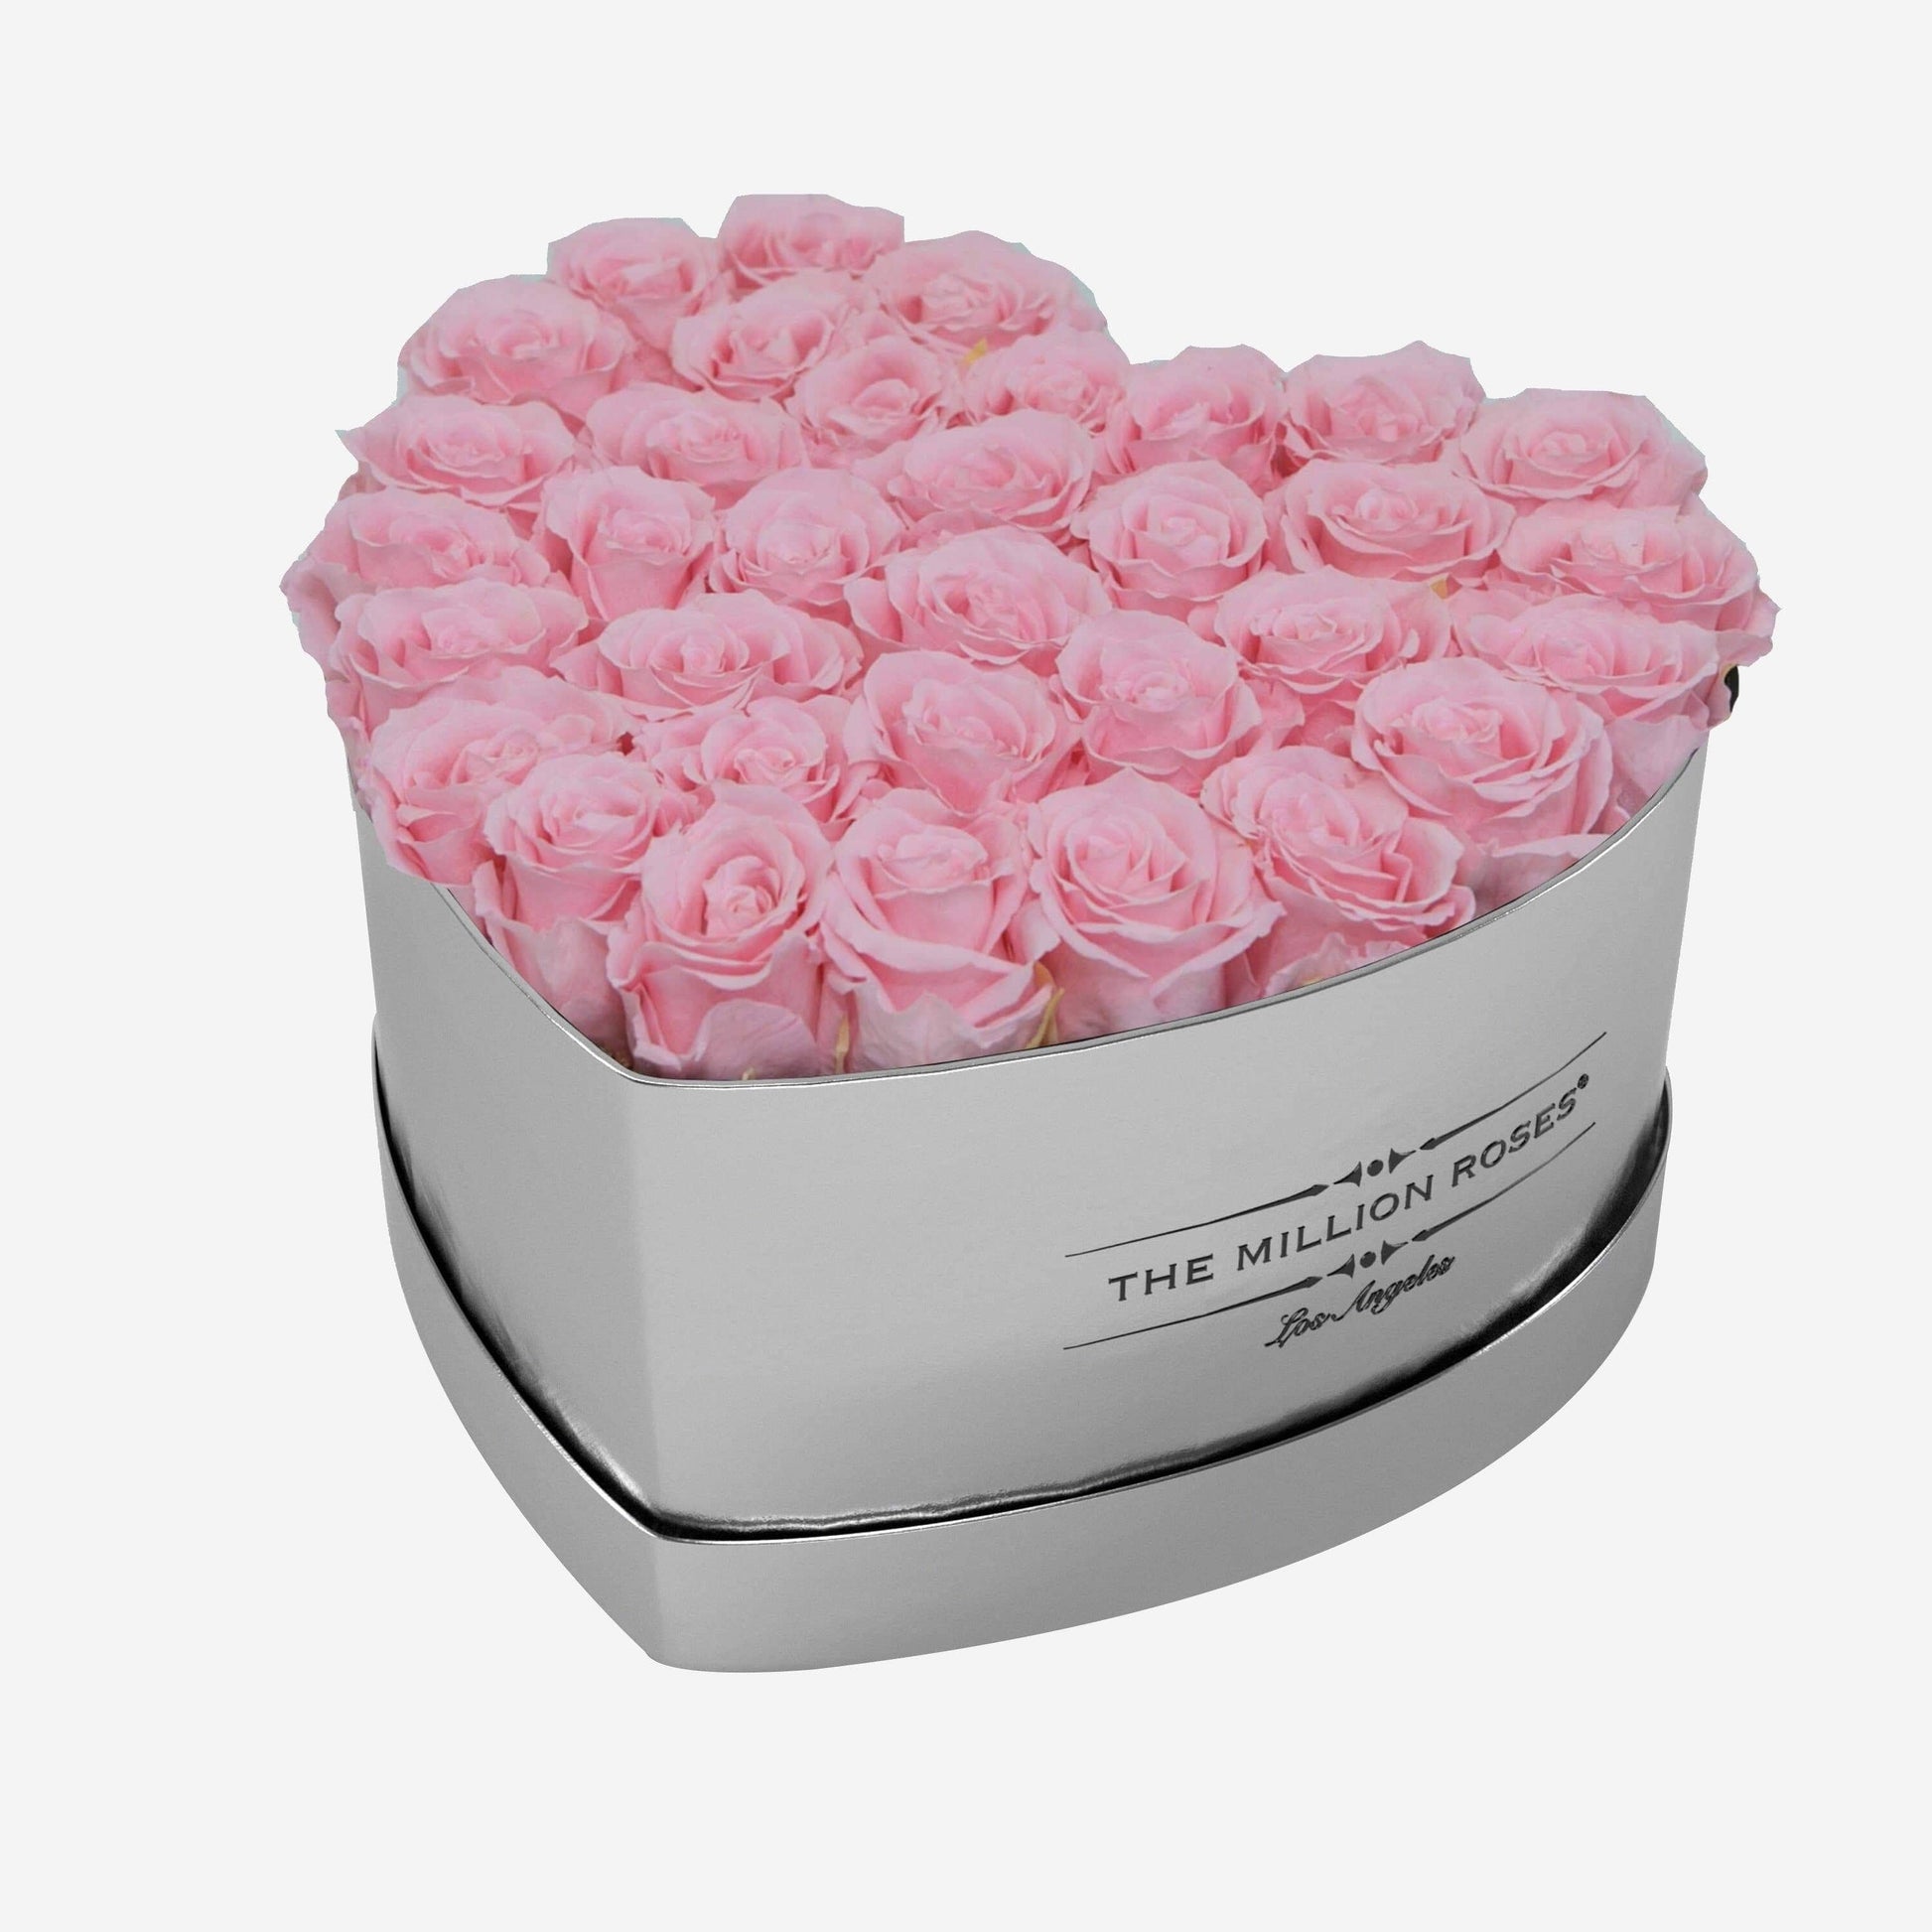 Heart Mirror Silver Box | Light Pink Roses - The Million Roses